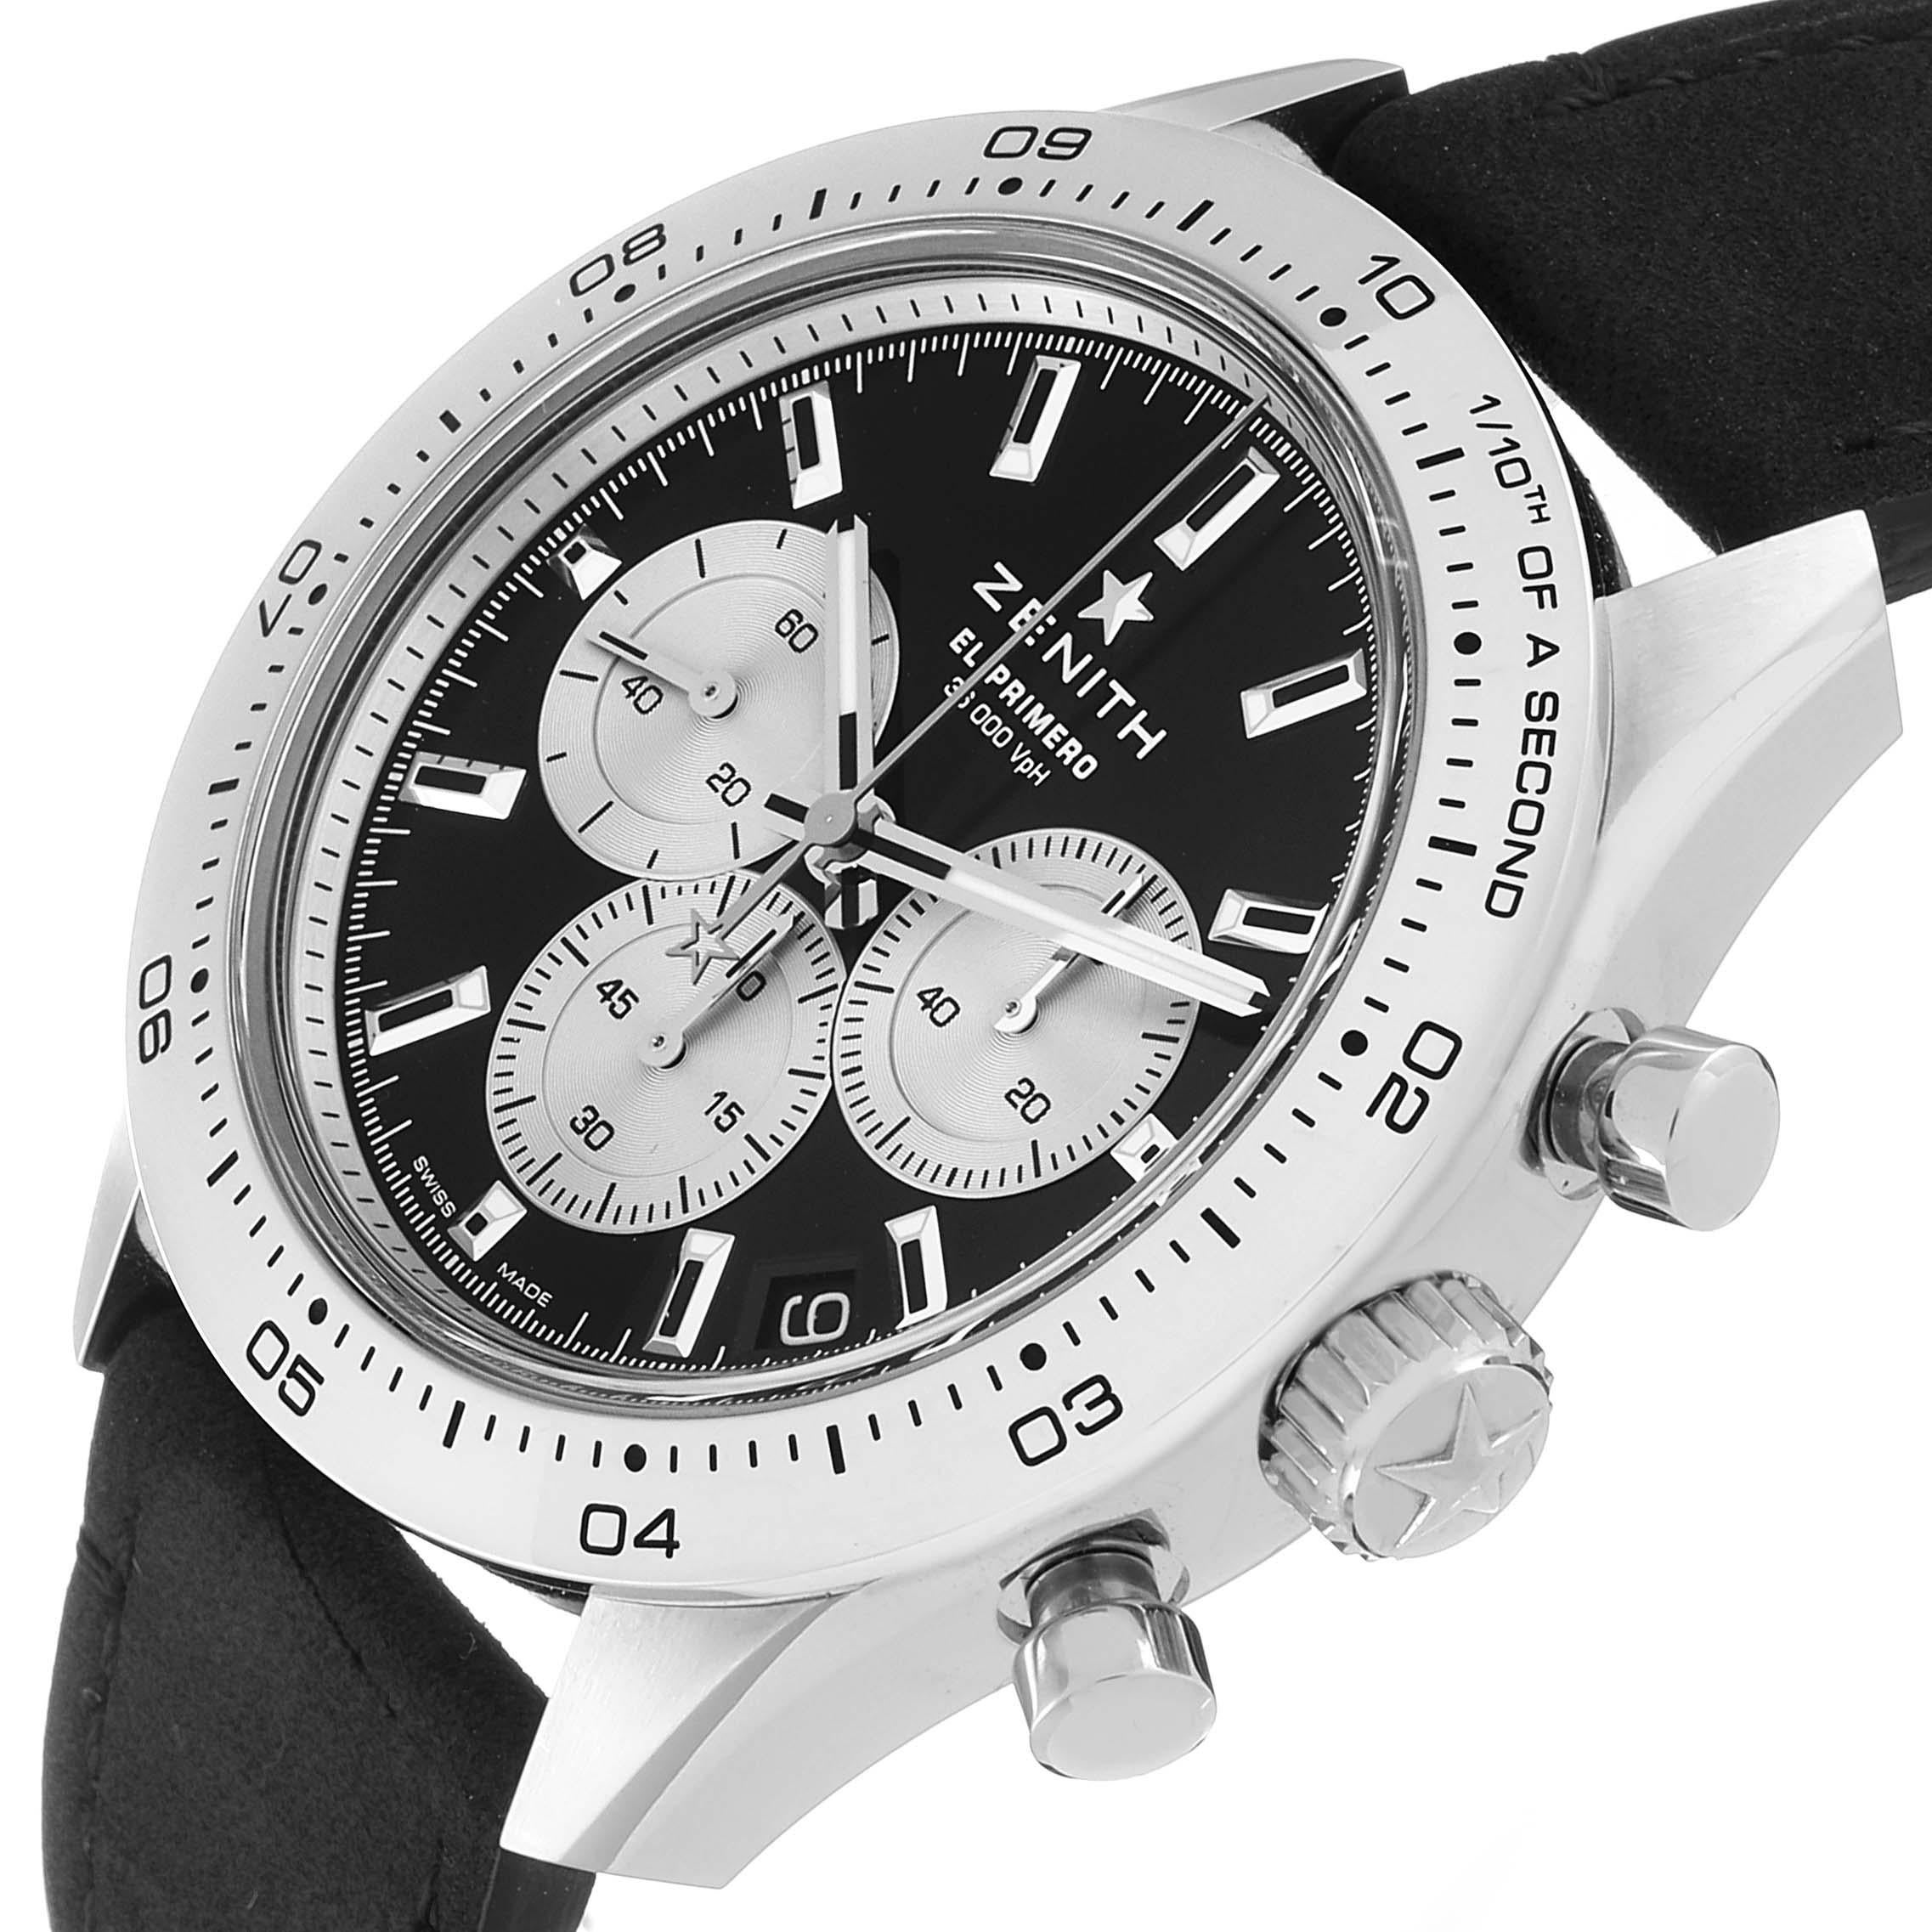 Zenith Chronomaster Sport Limited Edition White Gold Watch 65.3101.3600 Box Card For Sale 1